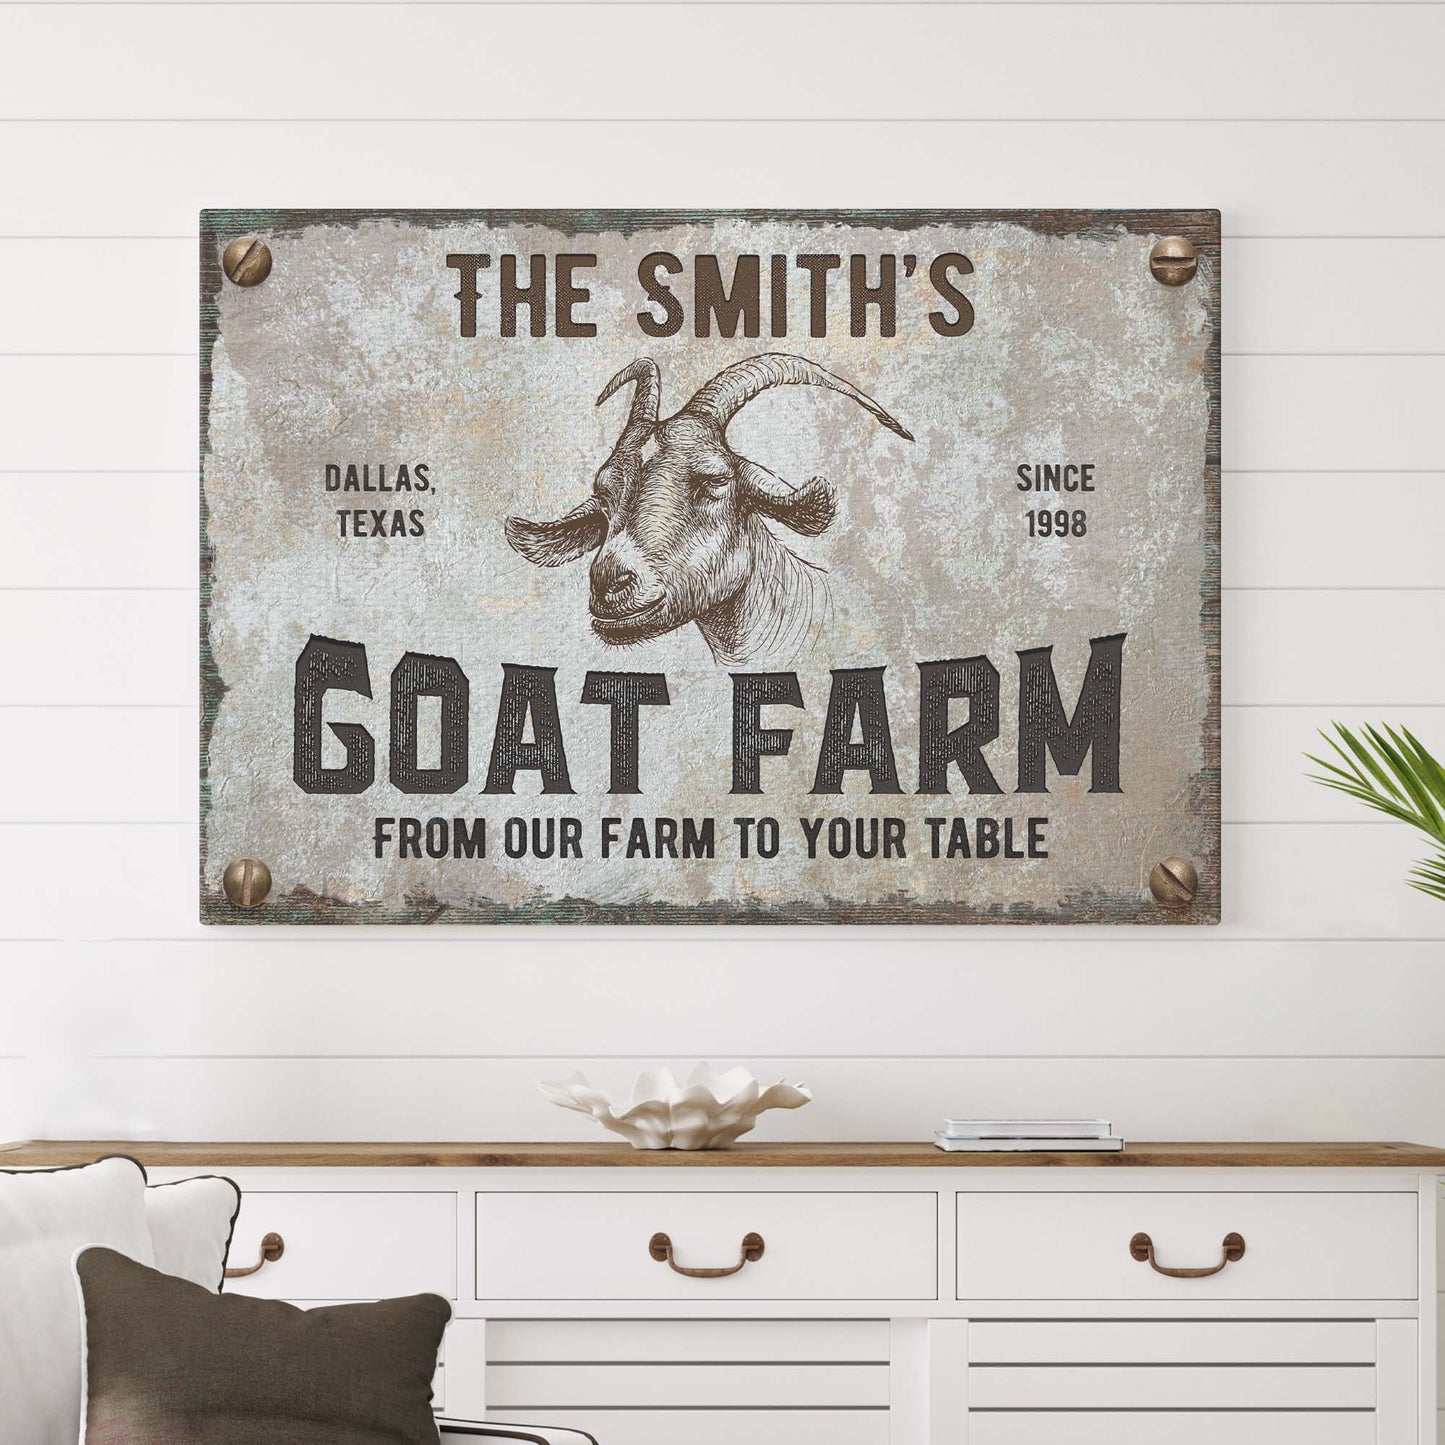 From Our Farm To Your Table Goat Farm Sign - Image by Tailored Canvases